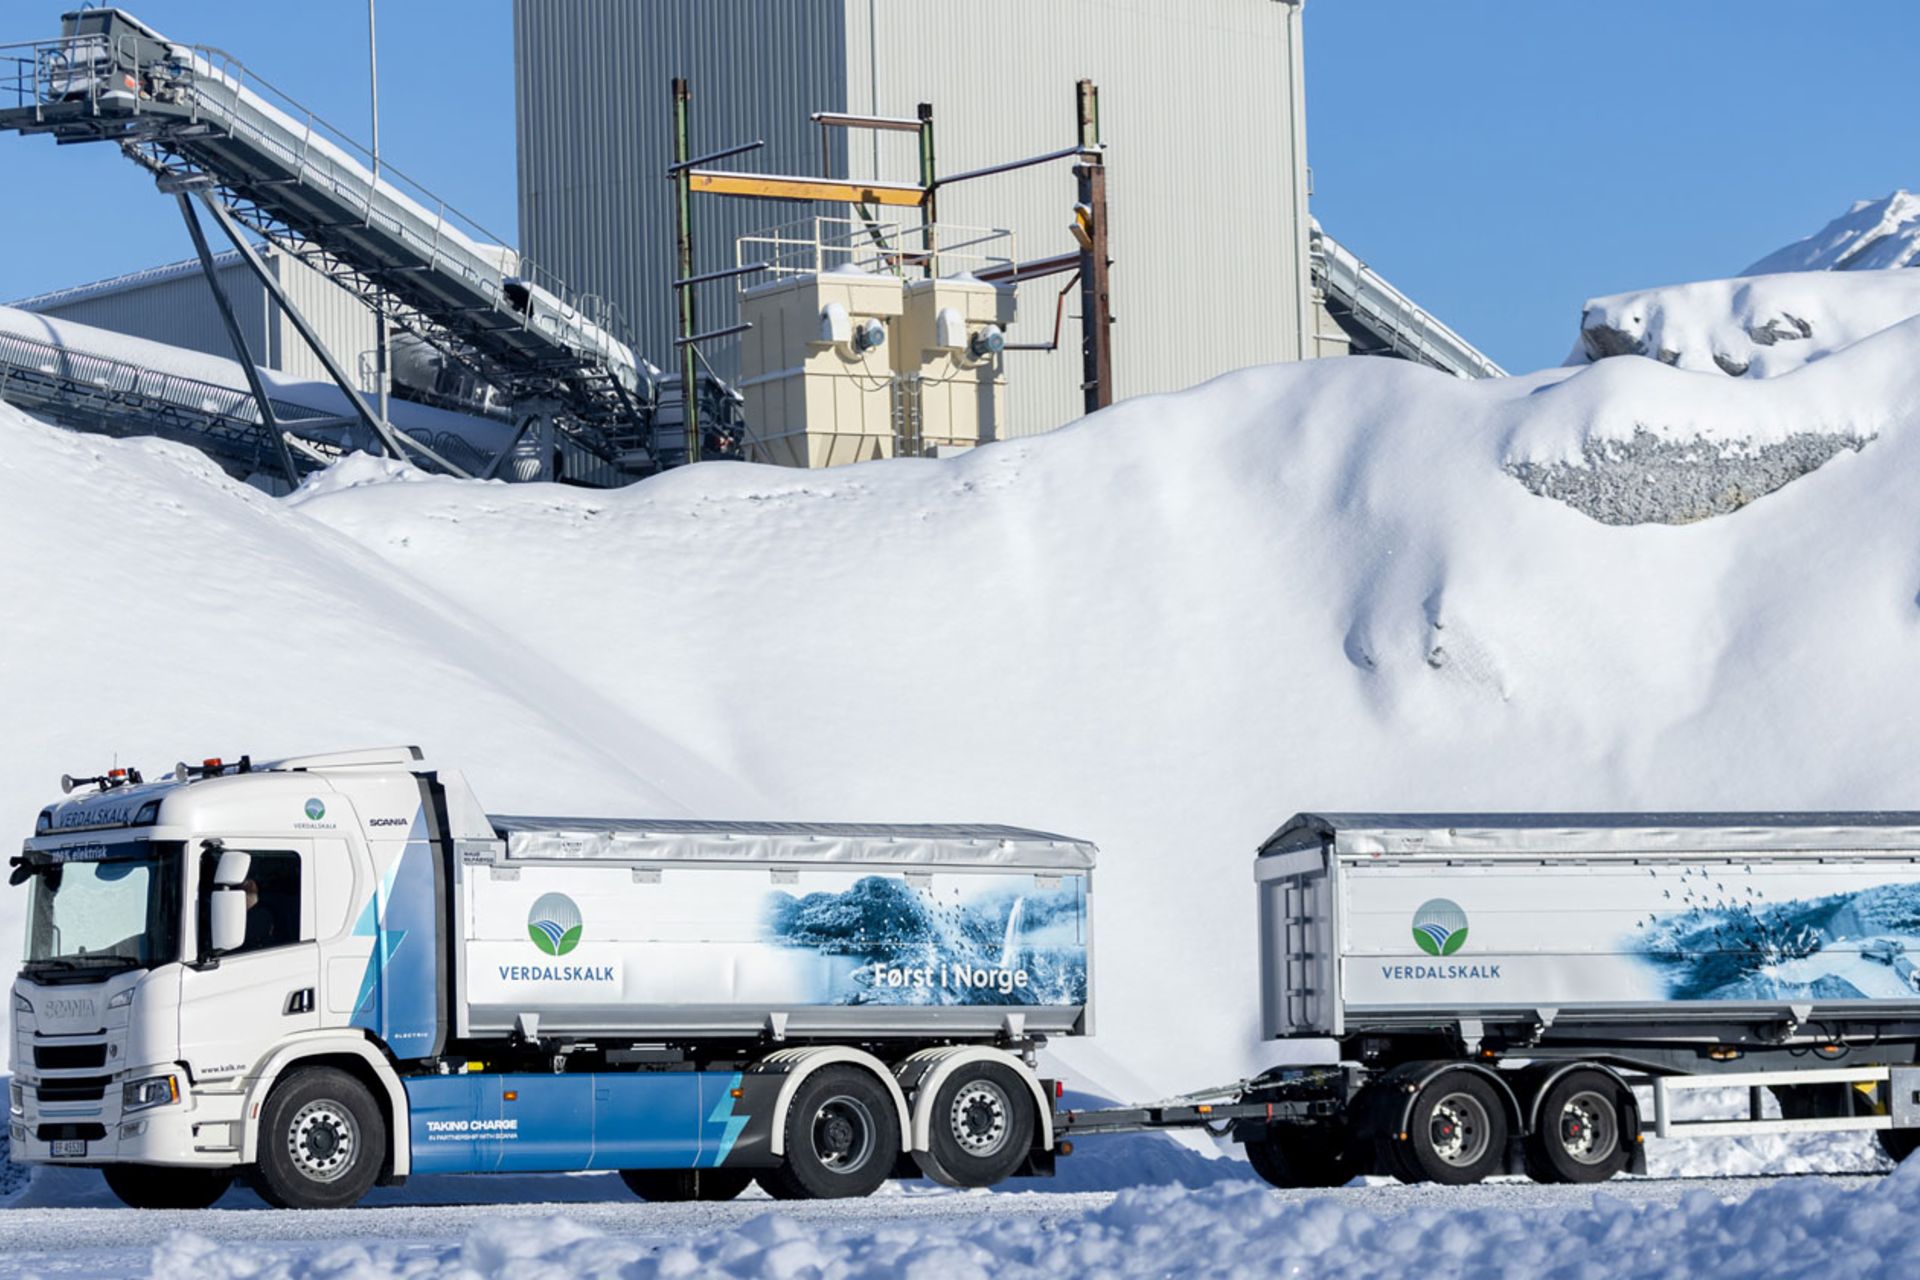 Scania has delivered Norway's largest electric truck to the Verdalskalk limestone quarry in Verdal, Norway. With a total weight of 66 tonnes, it will annually transport around 120,000 tonnes of lime from the quarry to the port for shipment. The previous fossil fuel consumption on the route will be cut by 58,800 litres, and CO2 emissions by 156 tonnes.